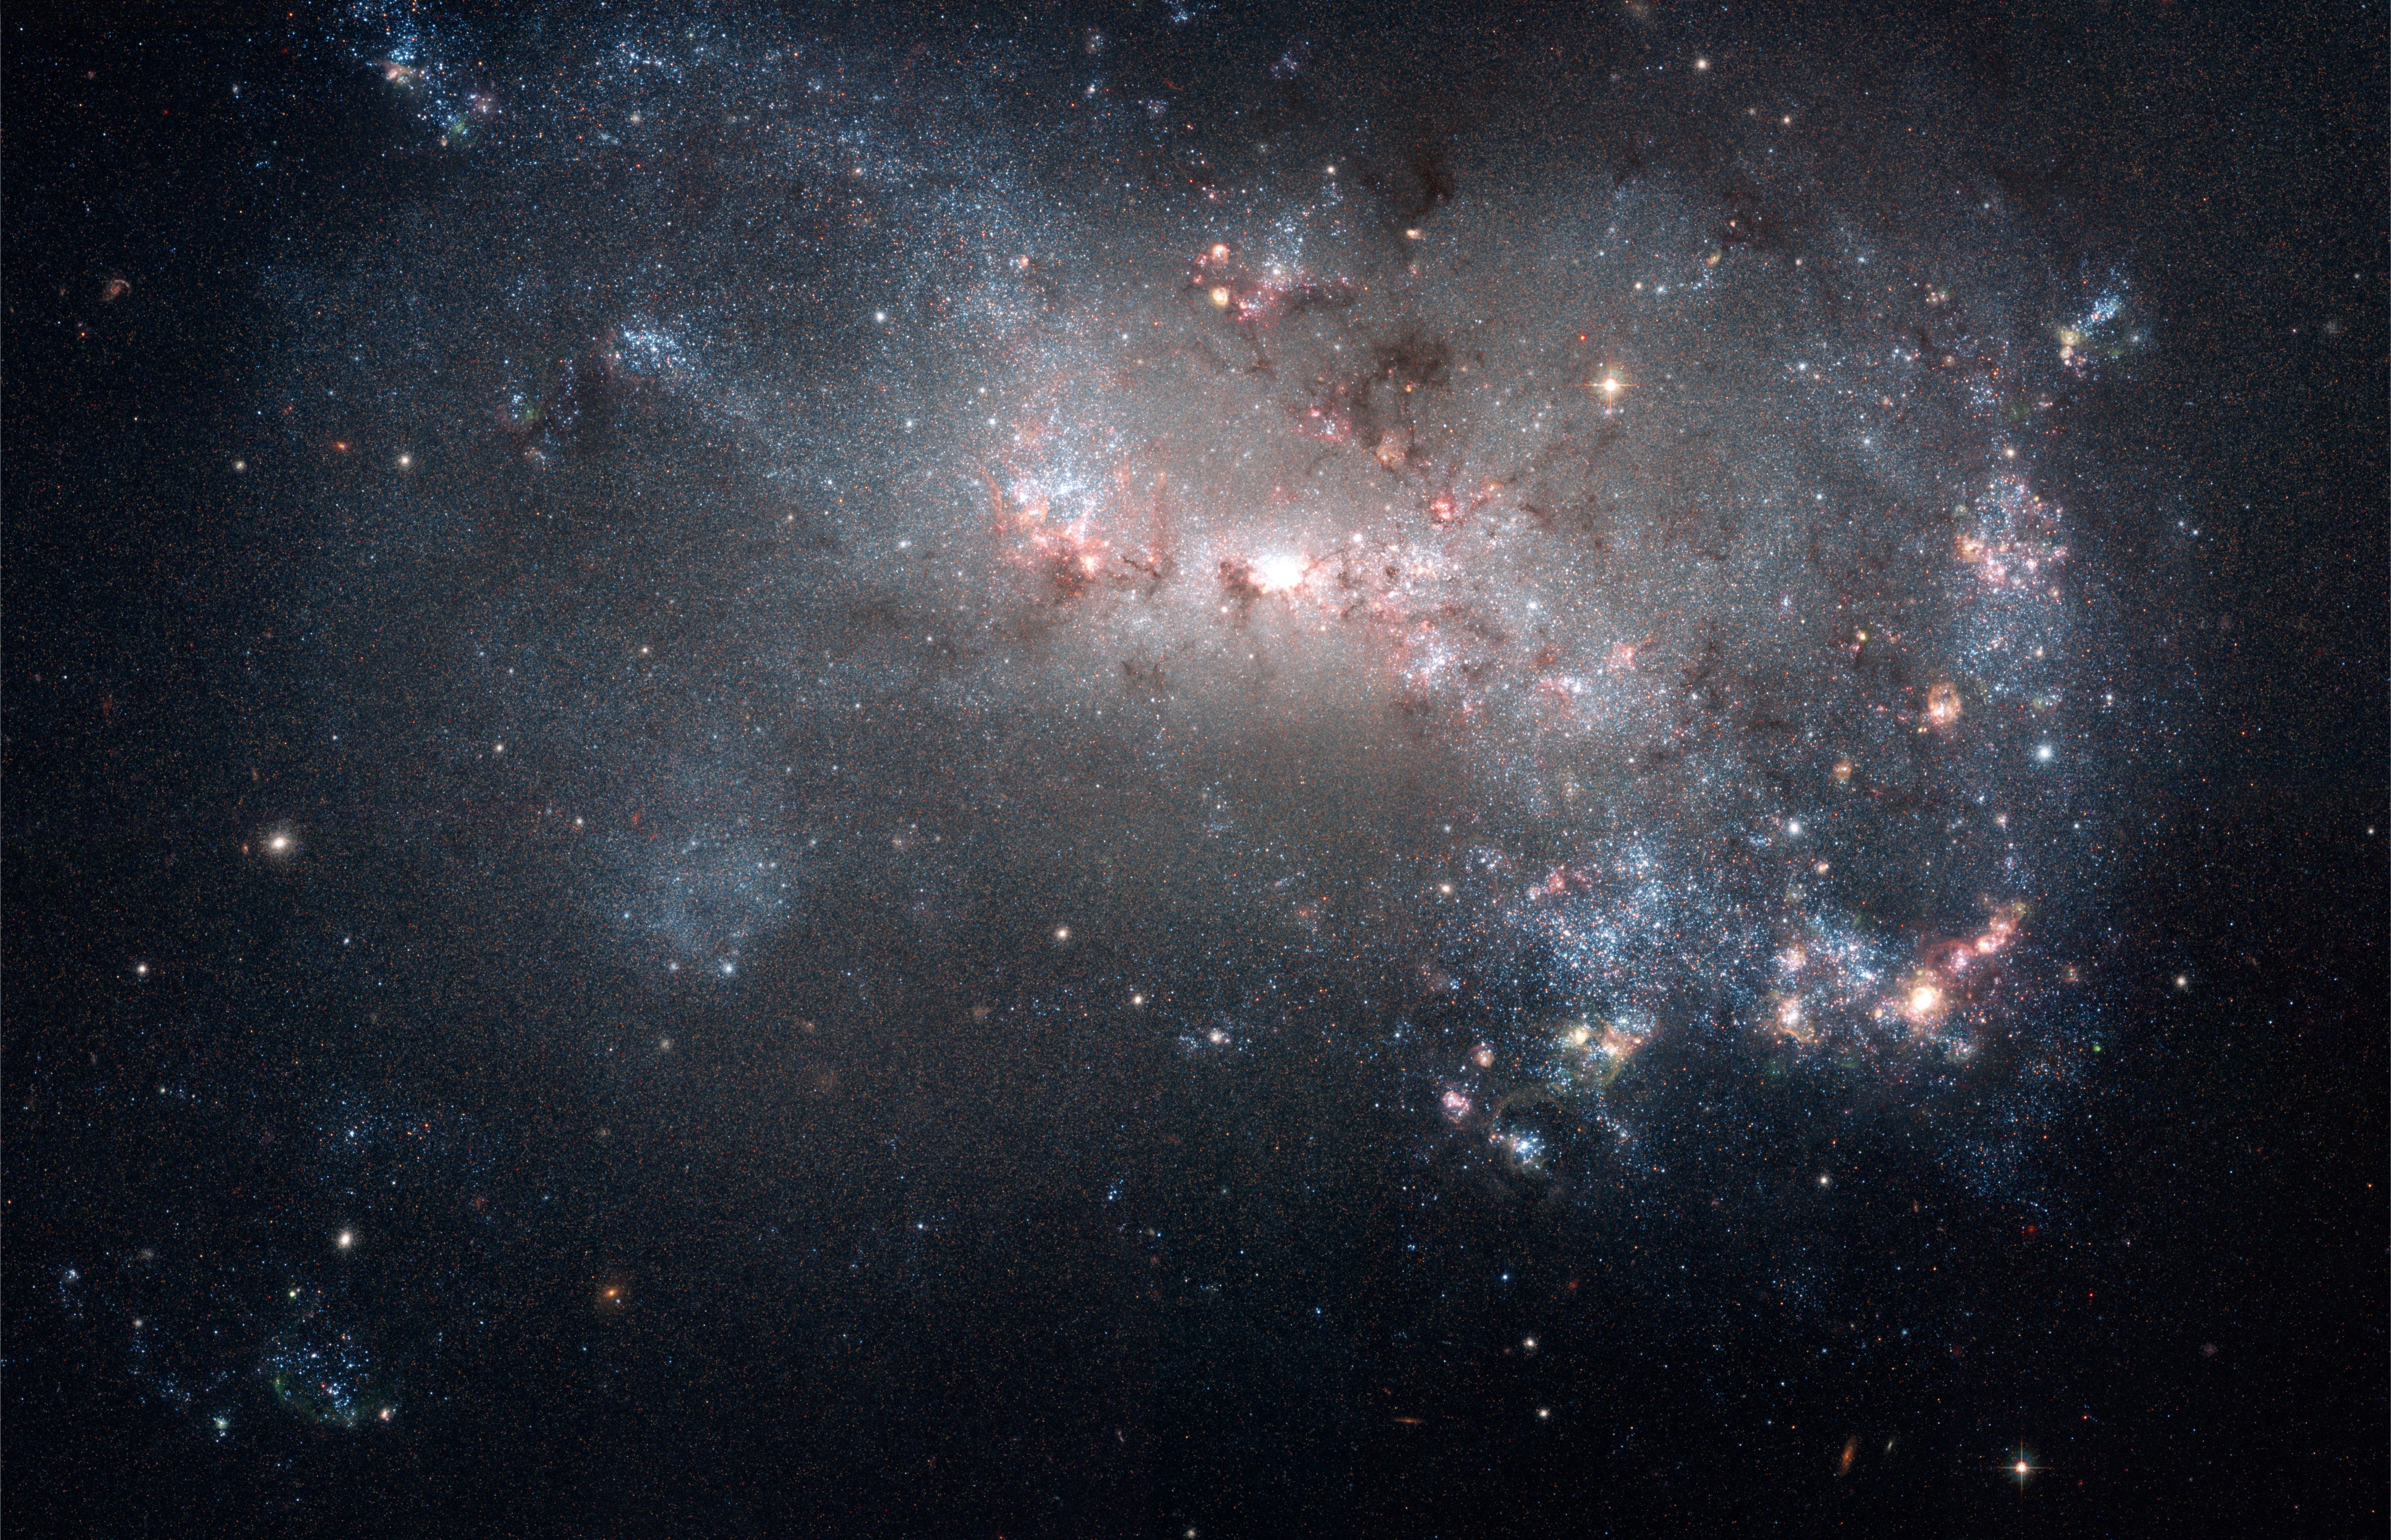 Starburst in NGC 4449 (captured by the Hubble Space Telescope)